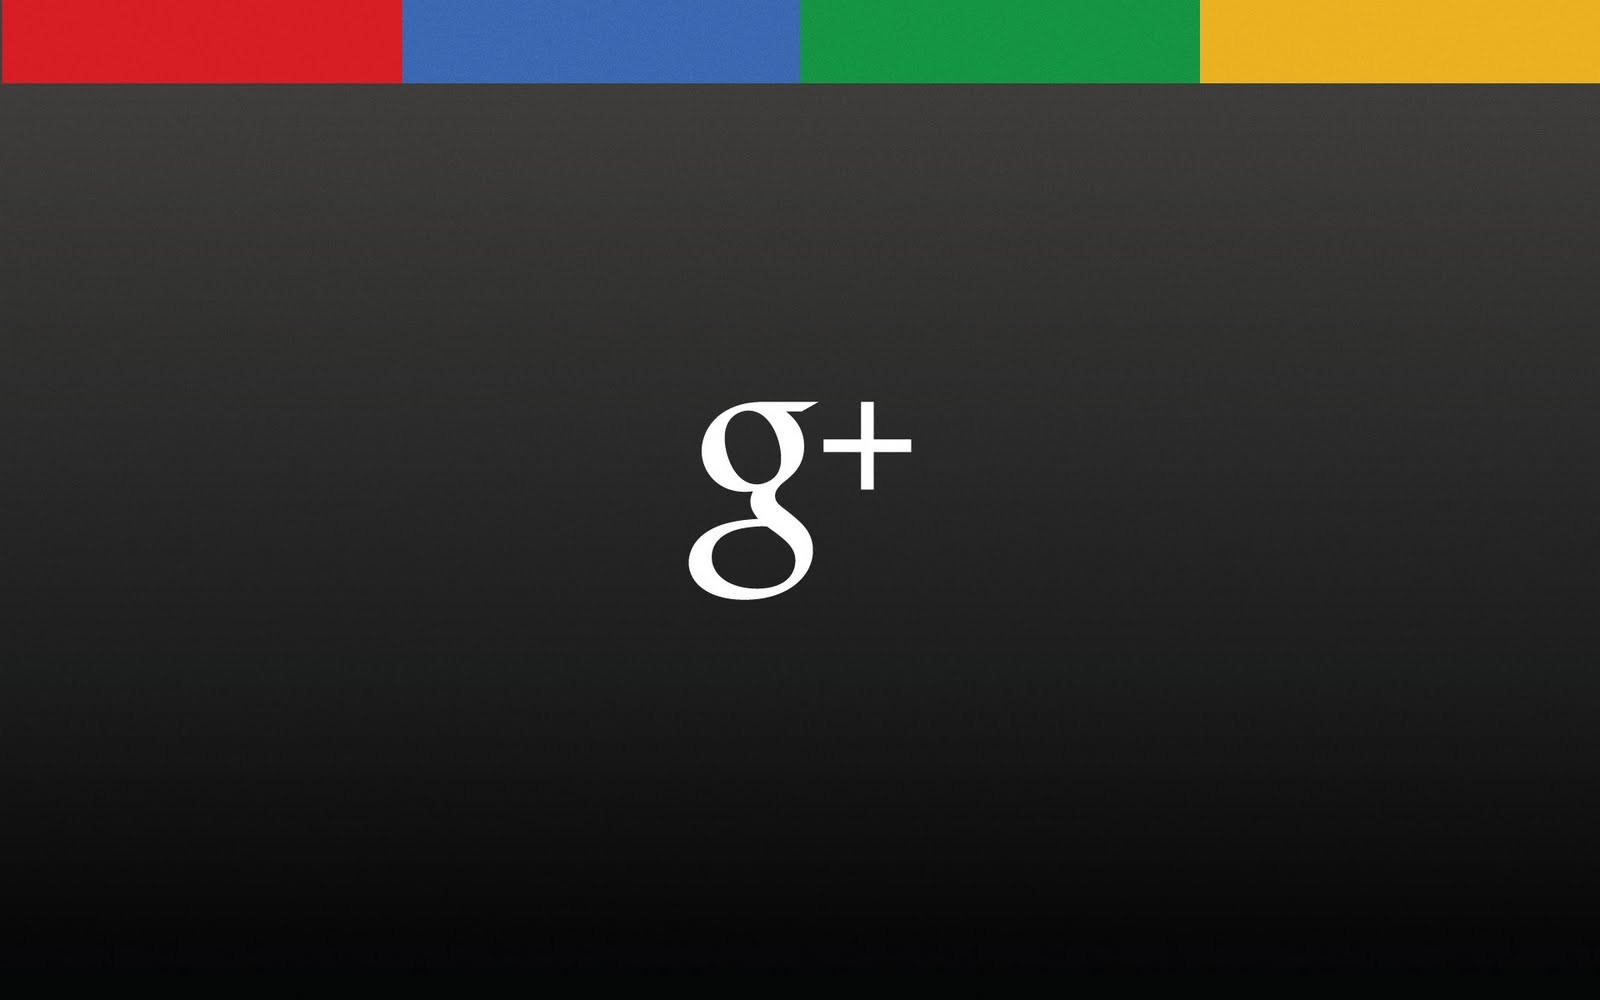 Google Plus g HD Logo Wallpaper Download Free Wallpapers in HD for